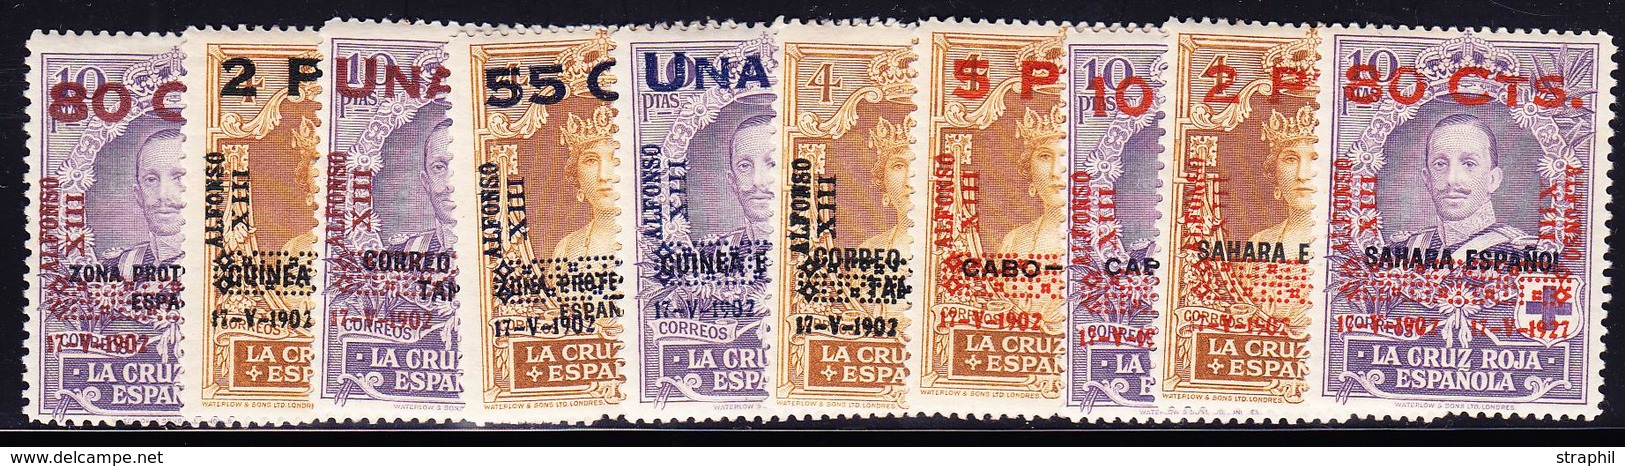 * ITALIE - TIMBRES TAXES - * - N°23 - 20 S/1c - Gomme Partielle - Aspect TB - Taxe